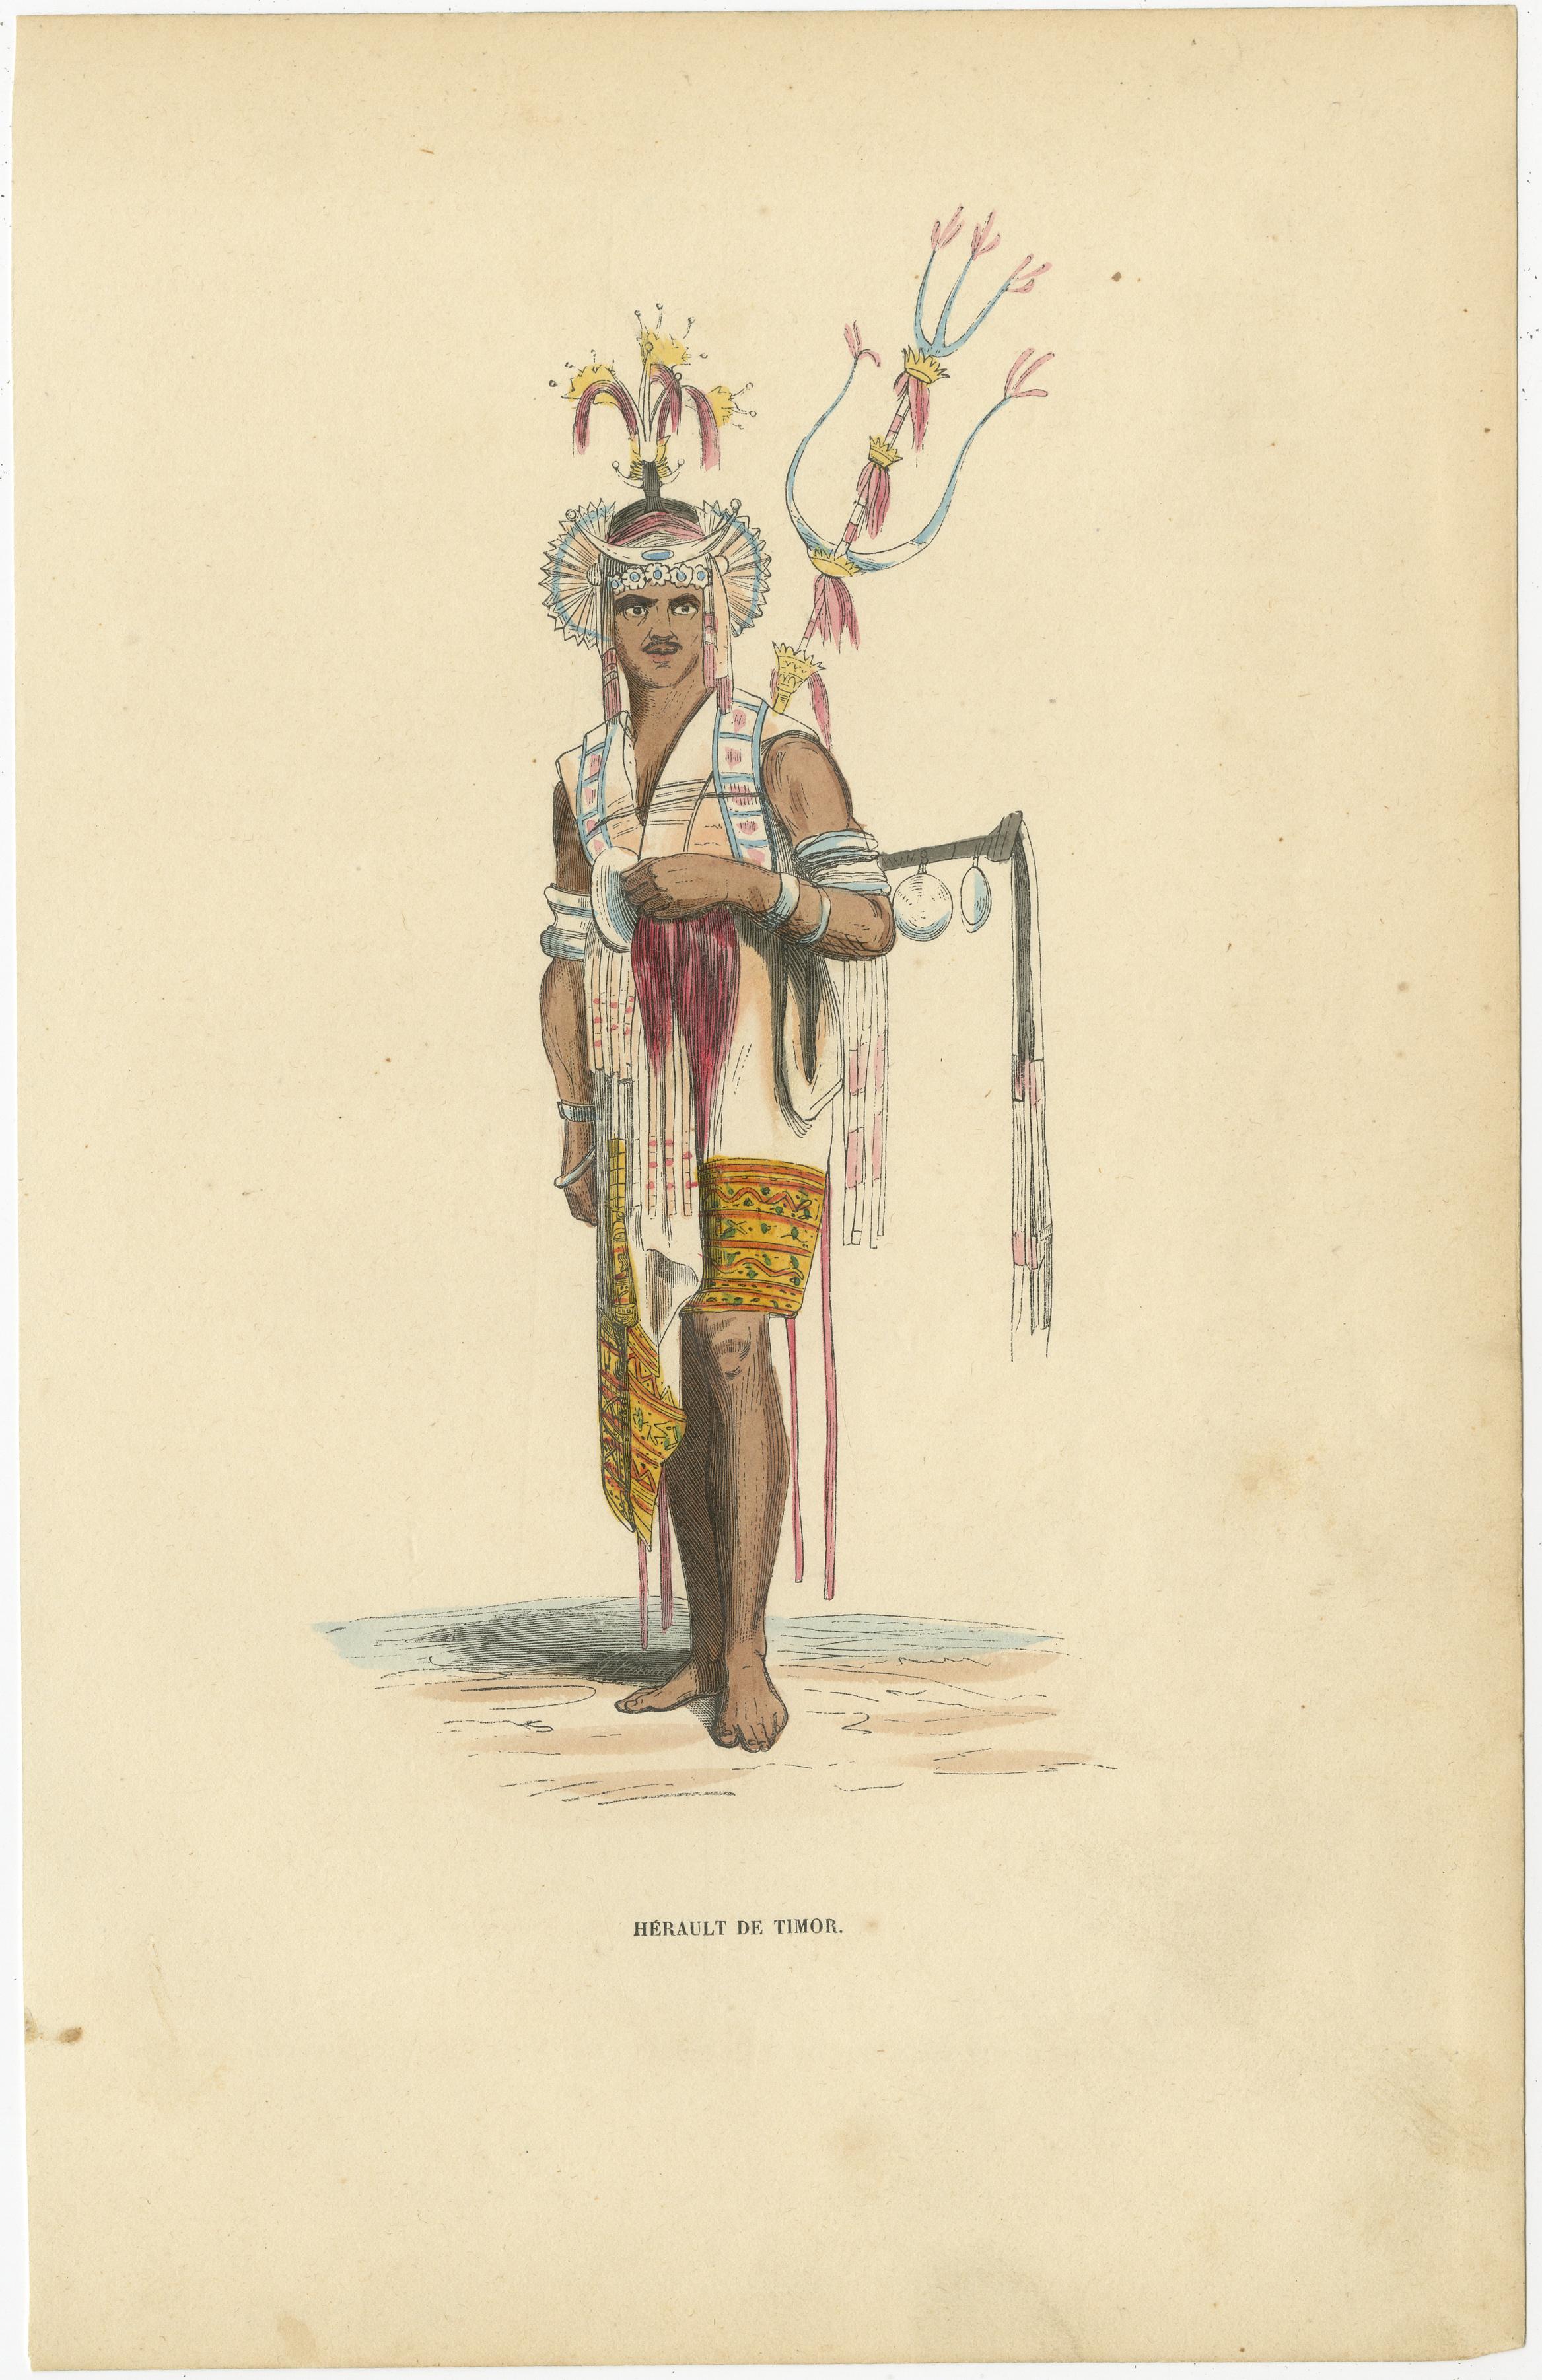 Antique print titled 'Hérault de Timor'. Hand colored woodcut of a herald of Amarasi, Kupang, Timor, West Timor, Indonesia. He wears a hat with decorative plant fronds and feathers, and a fringed tunic.

This print originates from Auguste Wahlen's